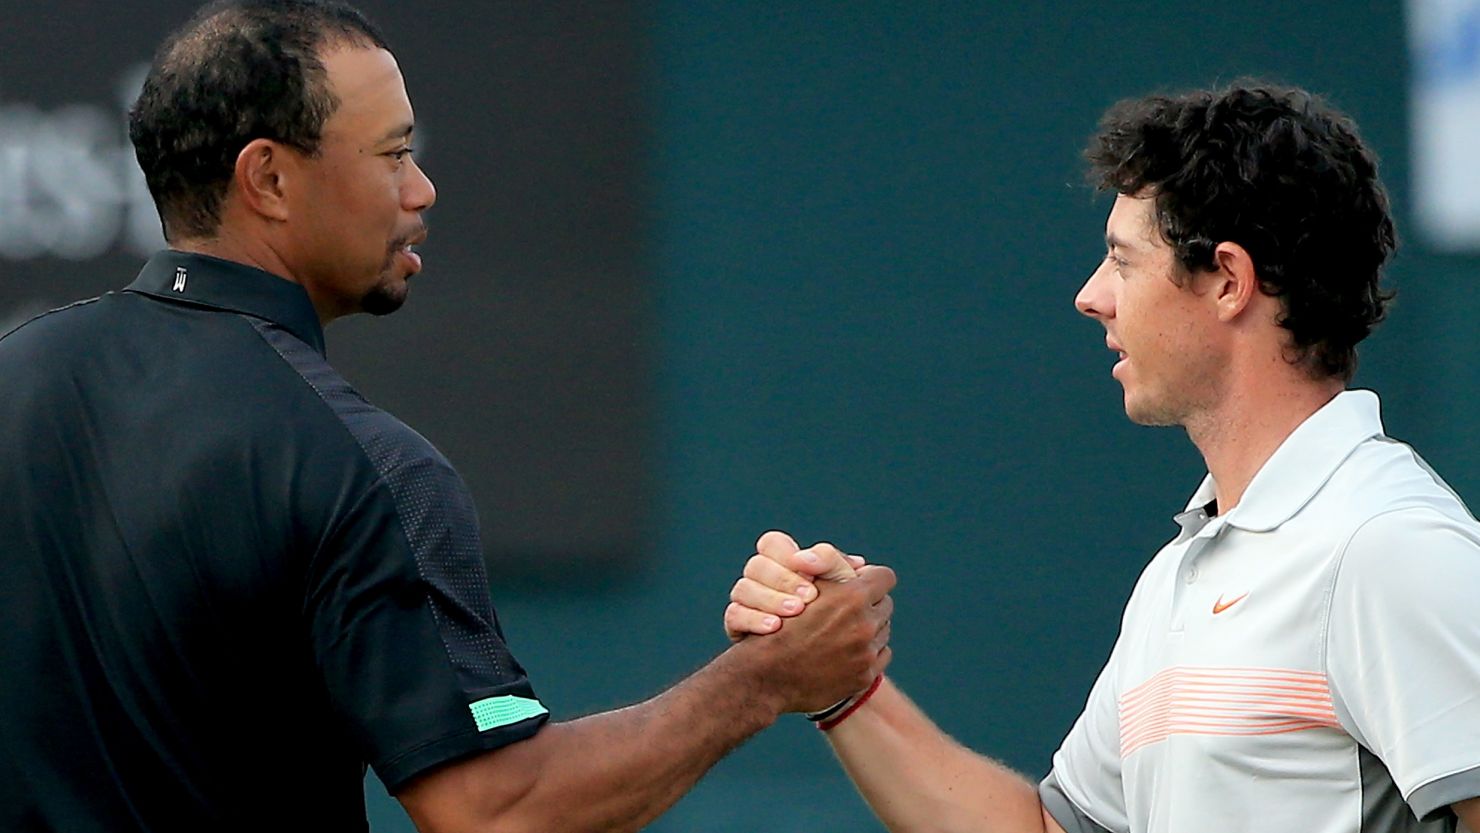 Rory McIlroy shakes hands with Tiger Woods after his second round 70 left him a shot clear of the field at the Dubai Desert Classic.